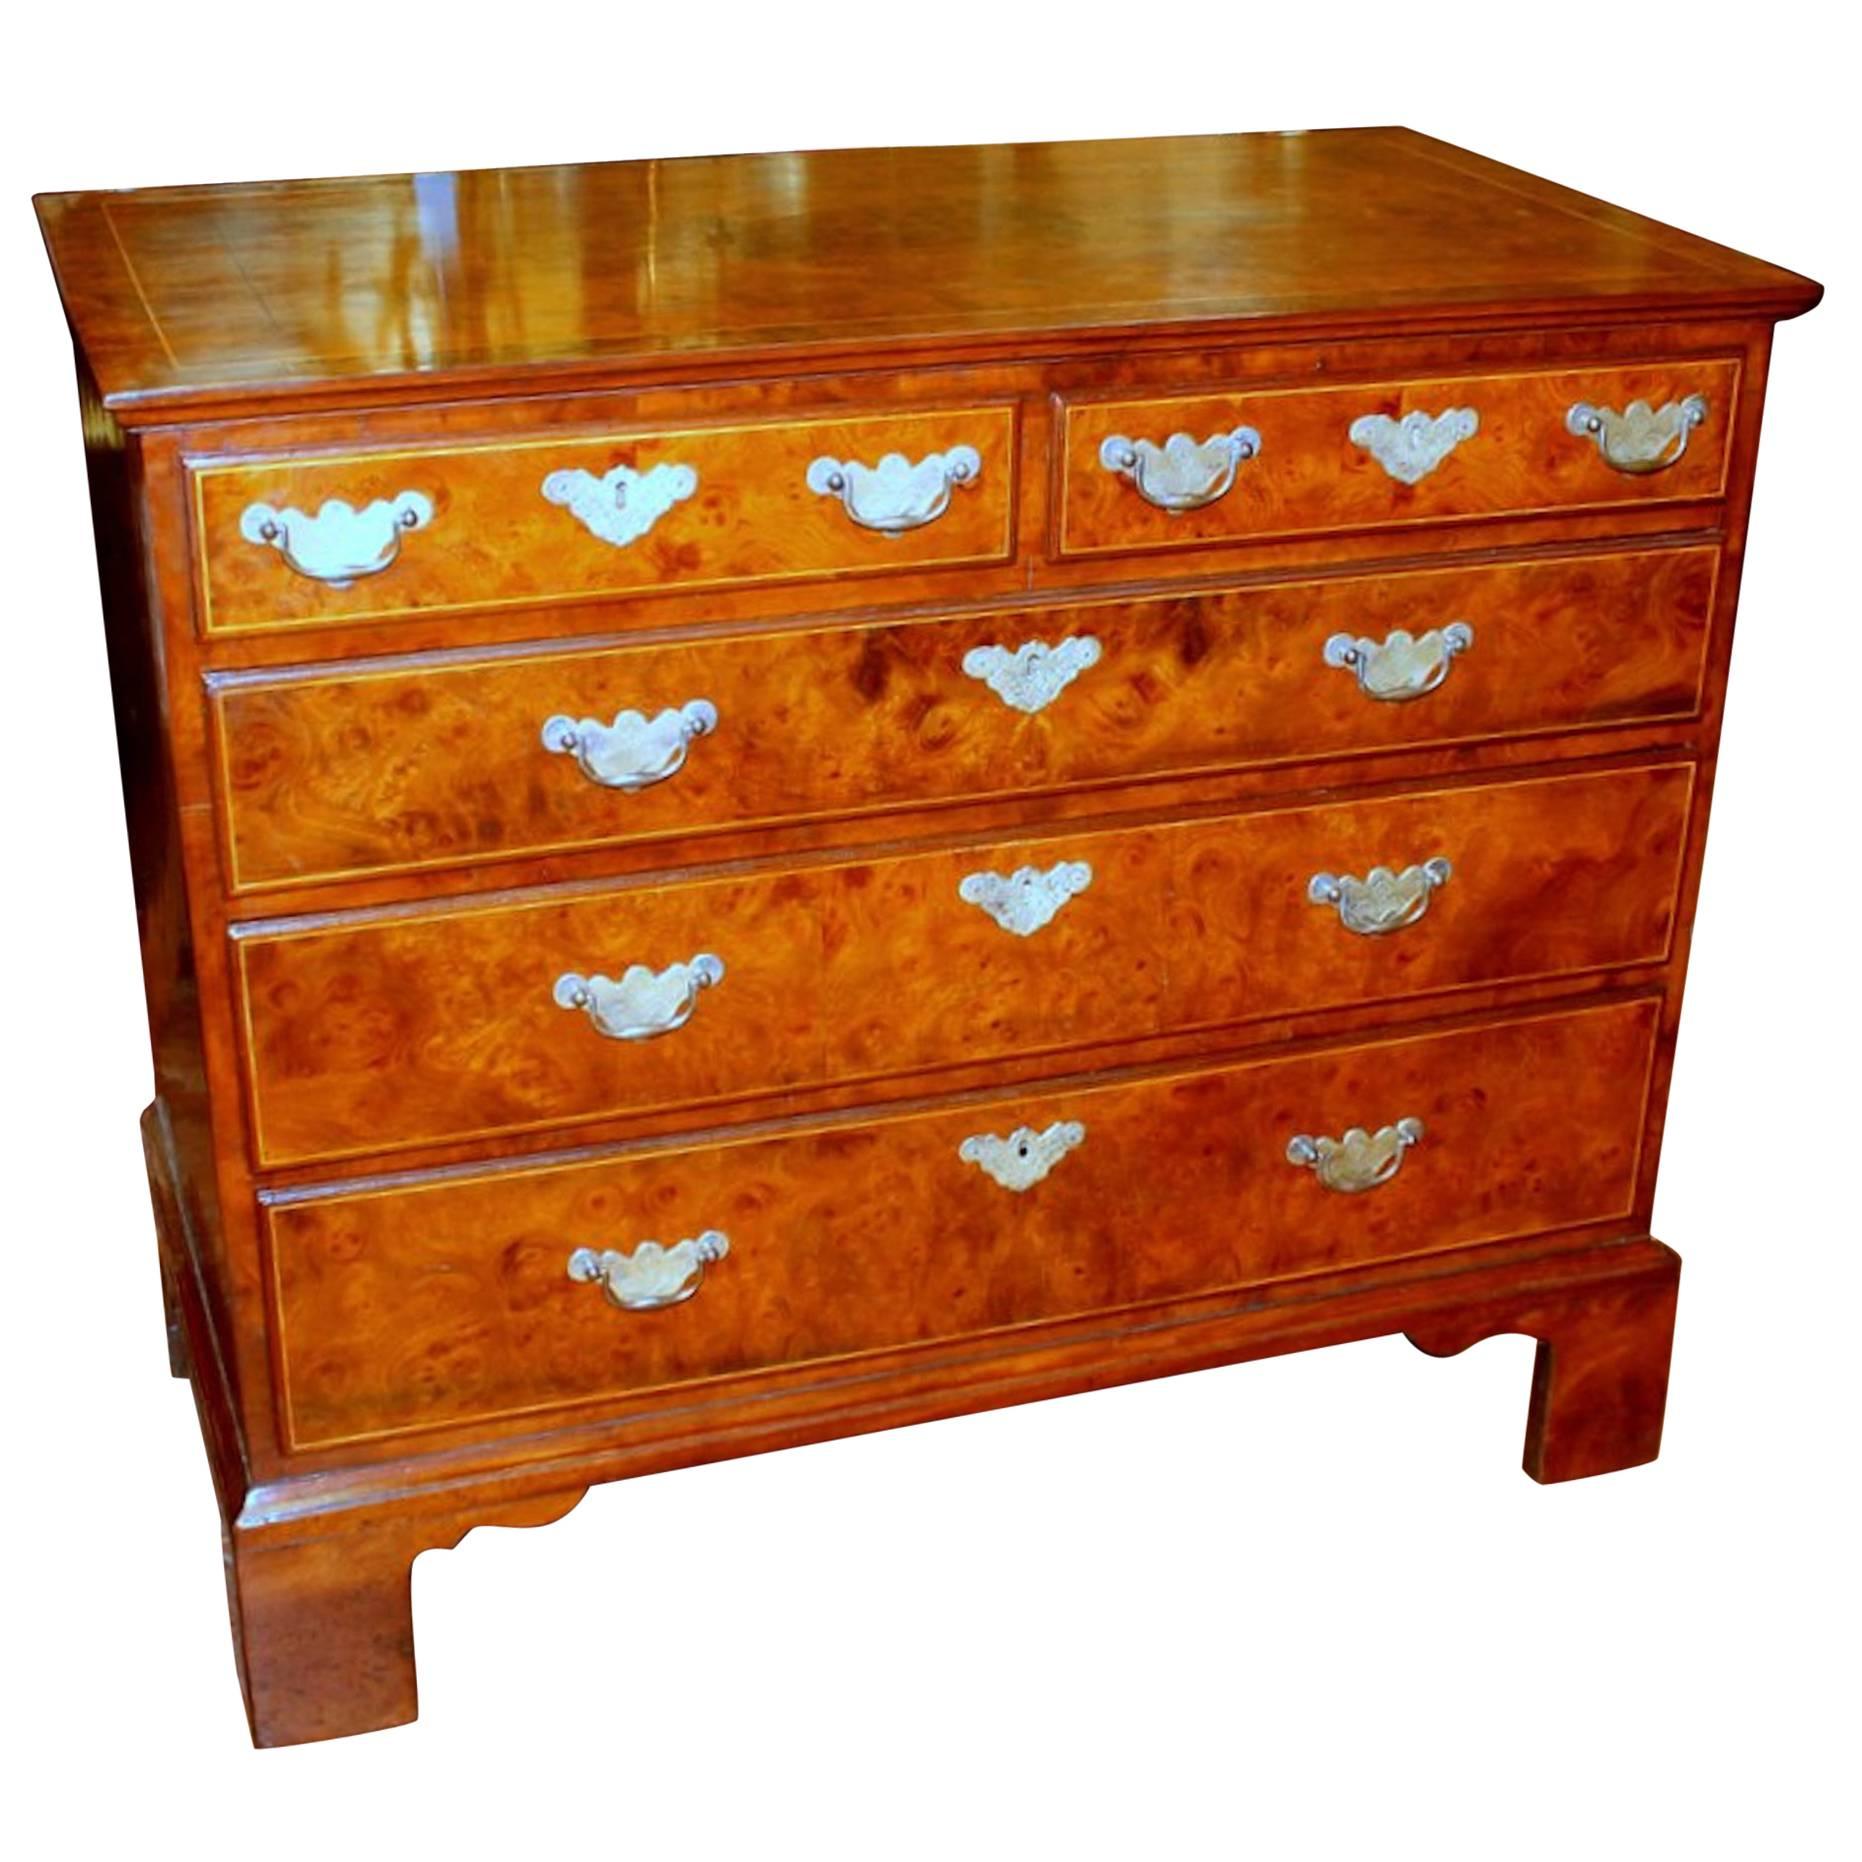 Antique English Inlaid Burr Walnut Queen Anne Revival Low Chest of Drawers